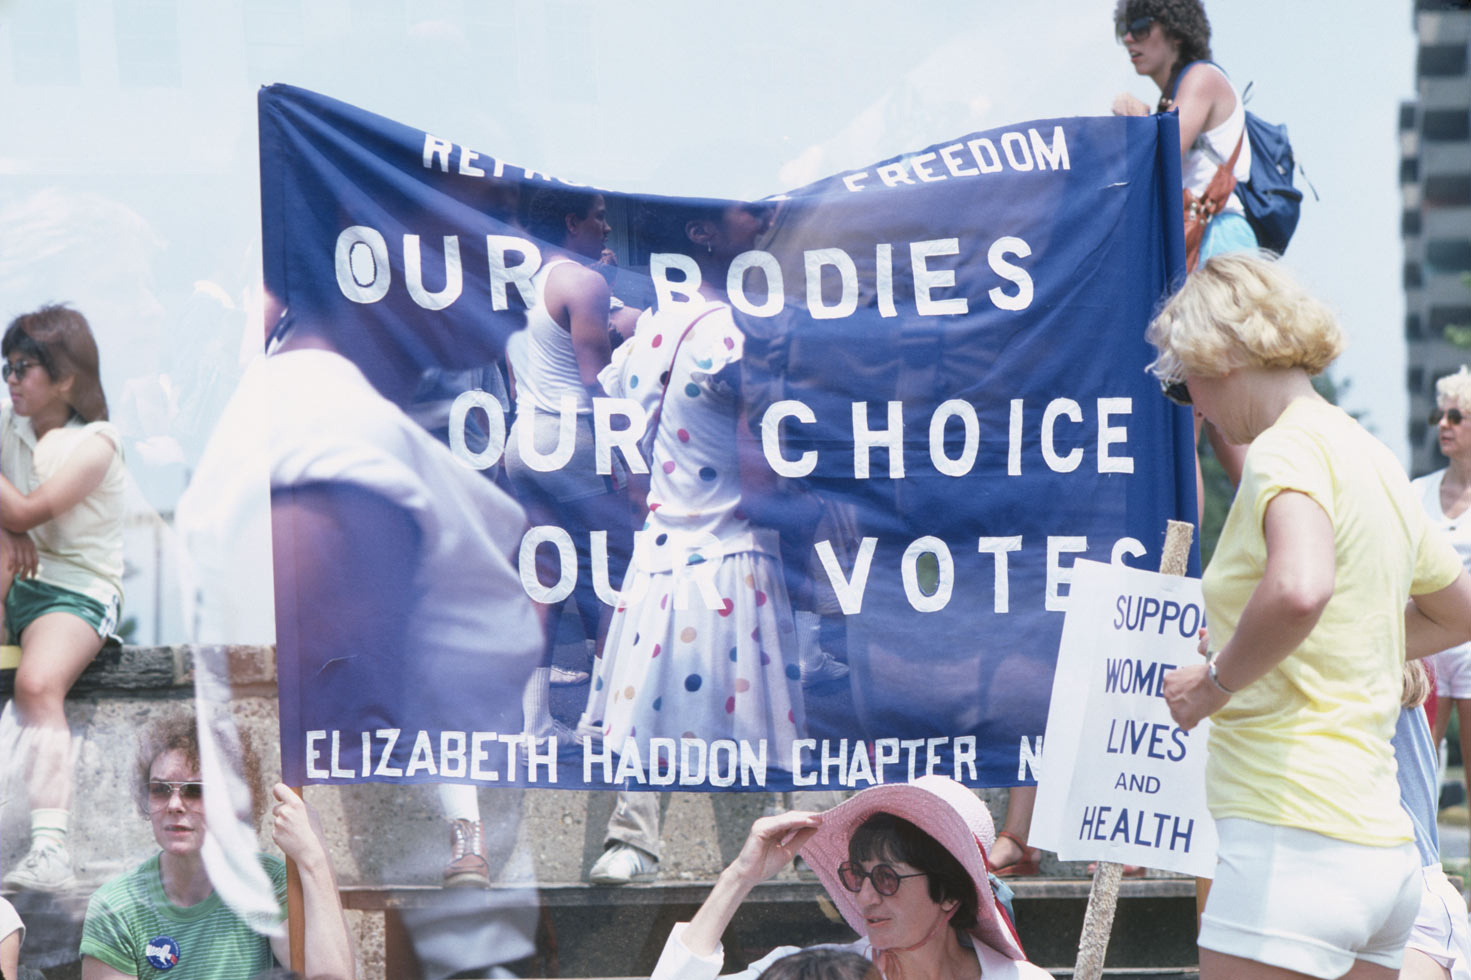 Pro-Choice March
Cherry Hill, New Jersey, 1982